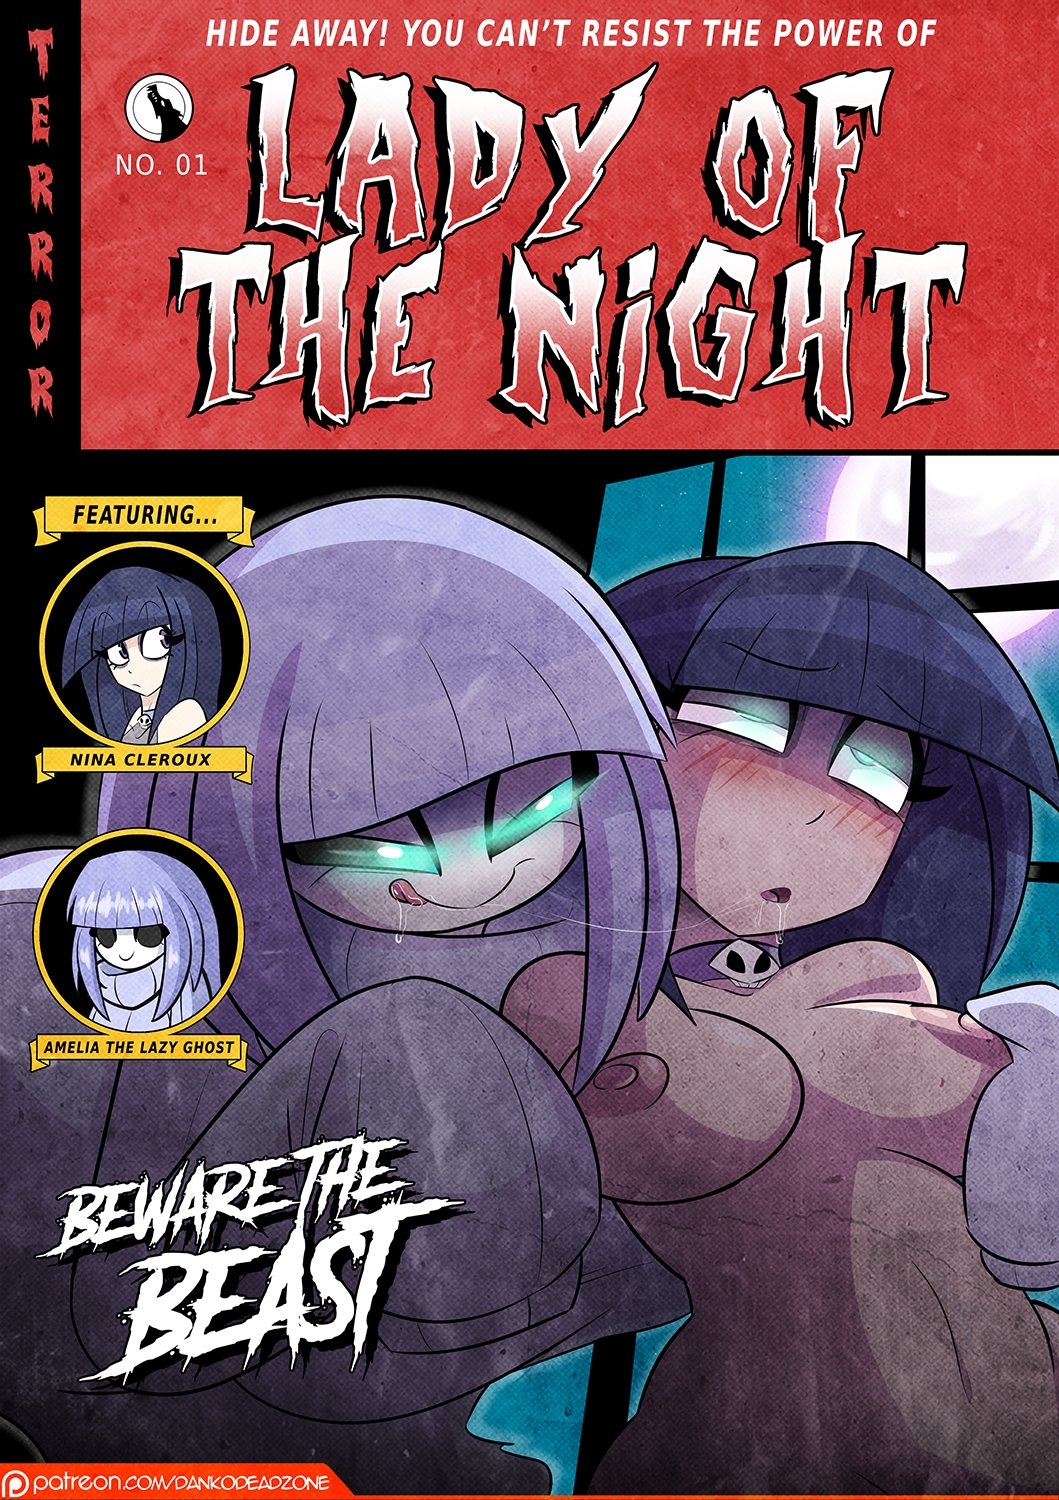 [DankoDeadZone] Lady of the Night Issue 1 [Ongoing] 0